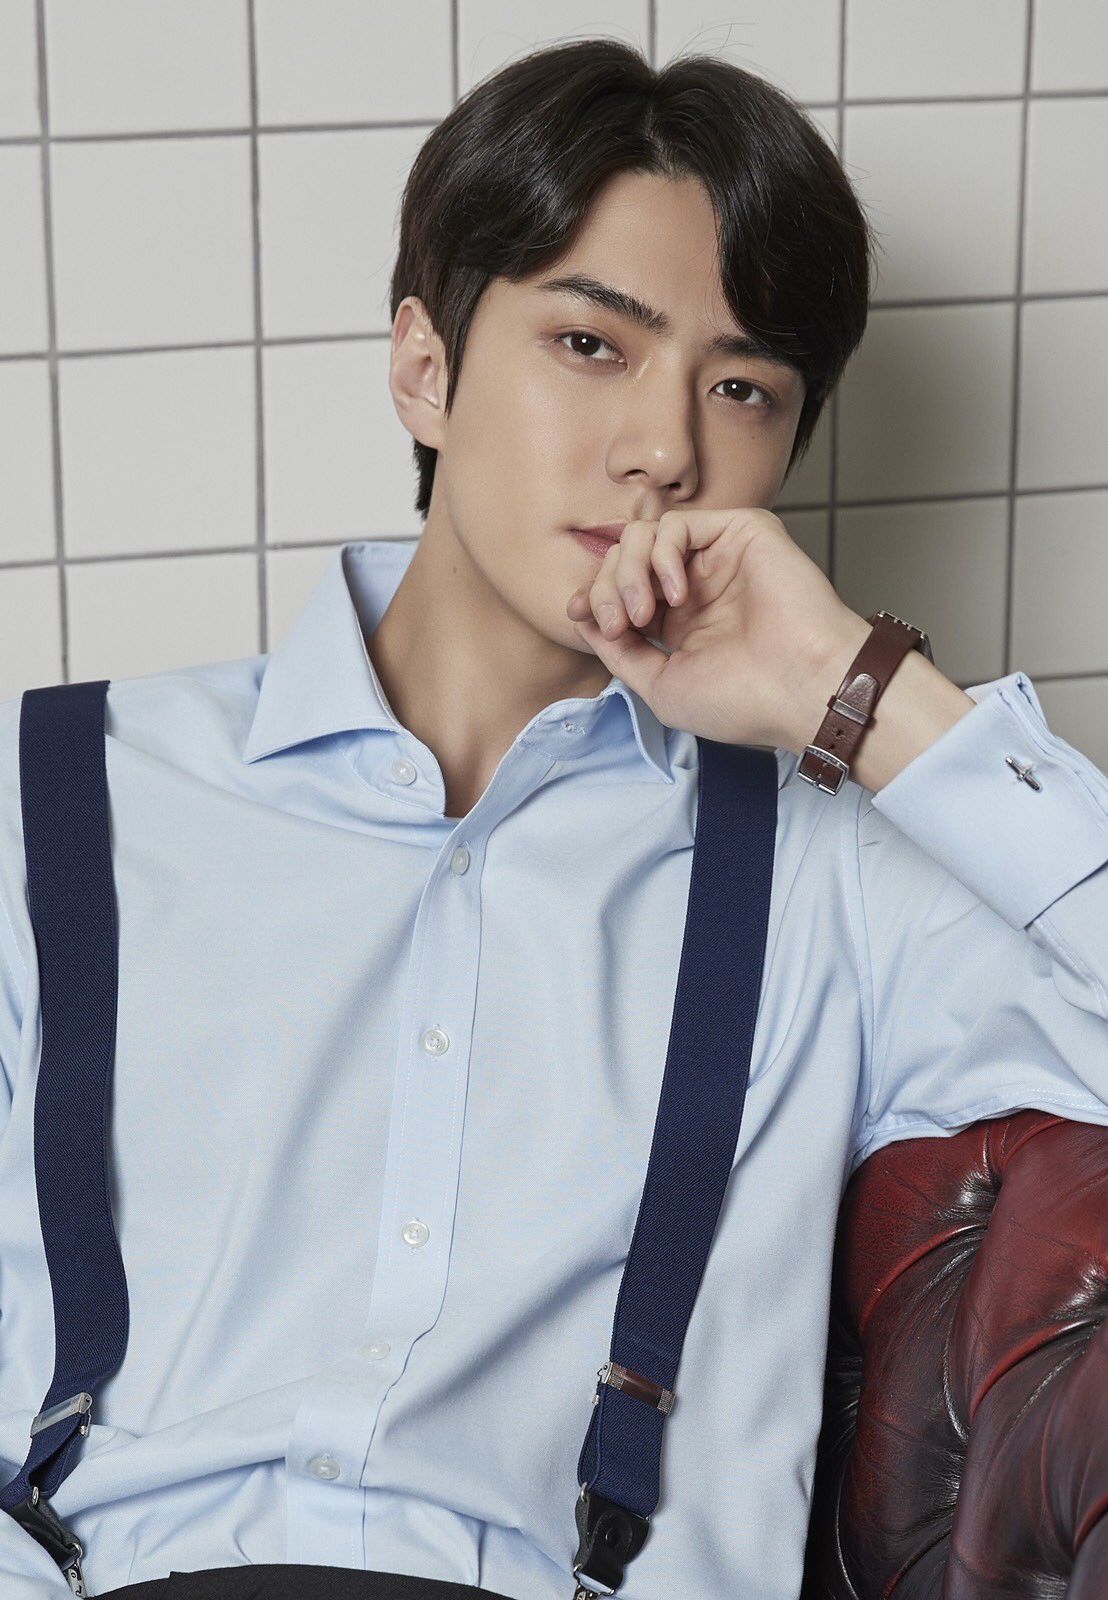 exo-sehun-confirmed-to-join-cast-of-sbs-drama-now-we-are-breaking-up-with-song-hye-kyo-jang-ki-yong-and-more